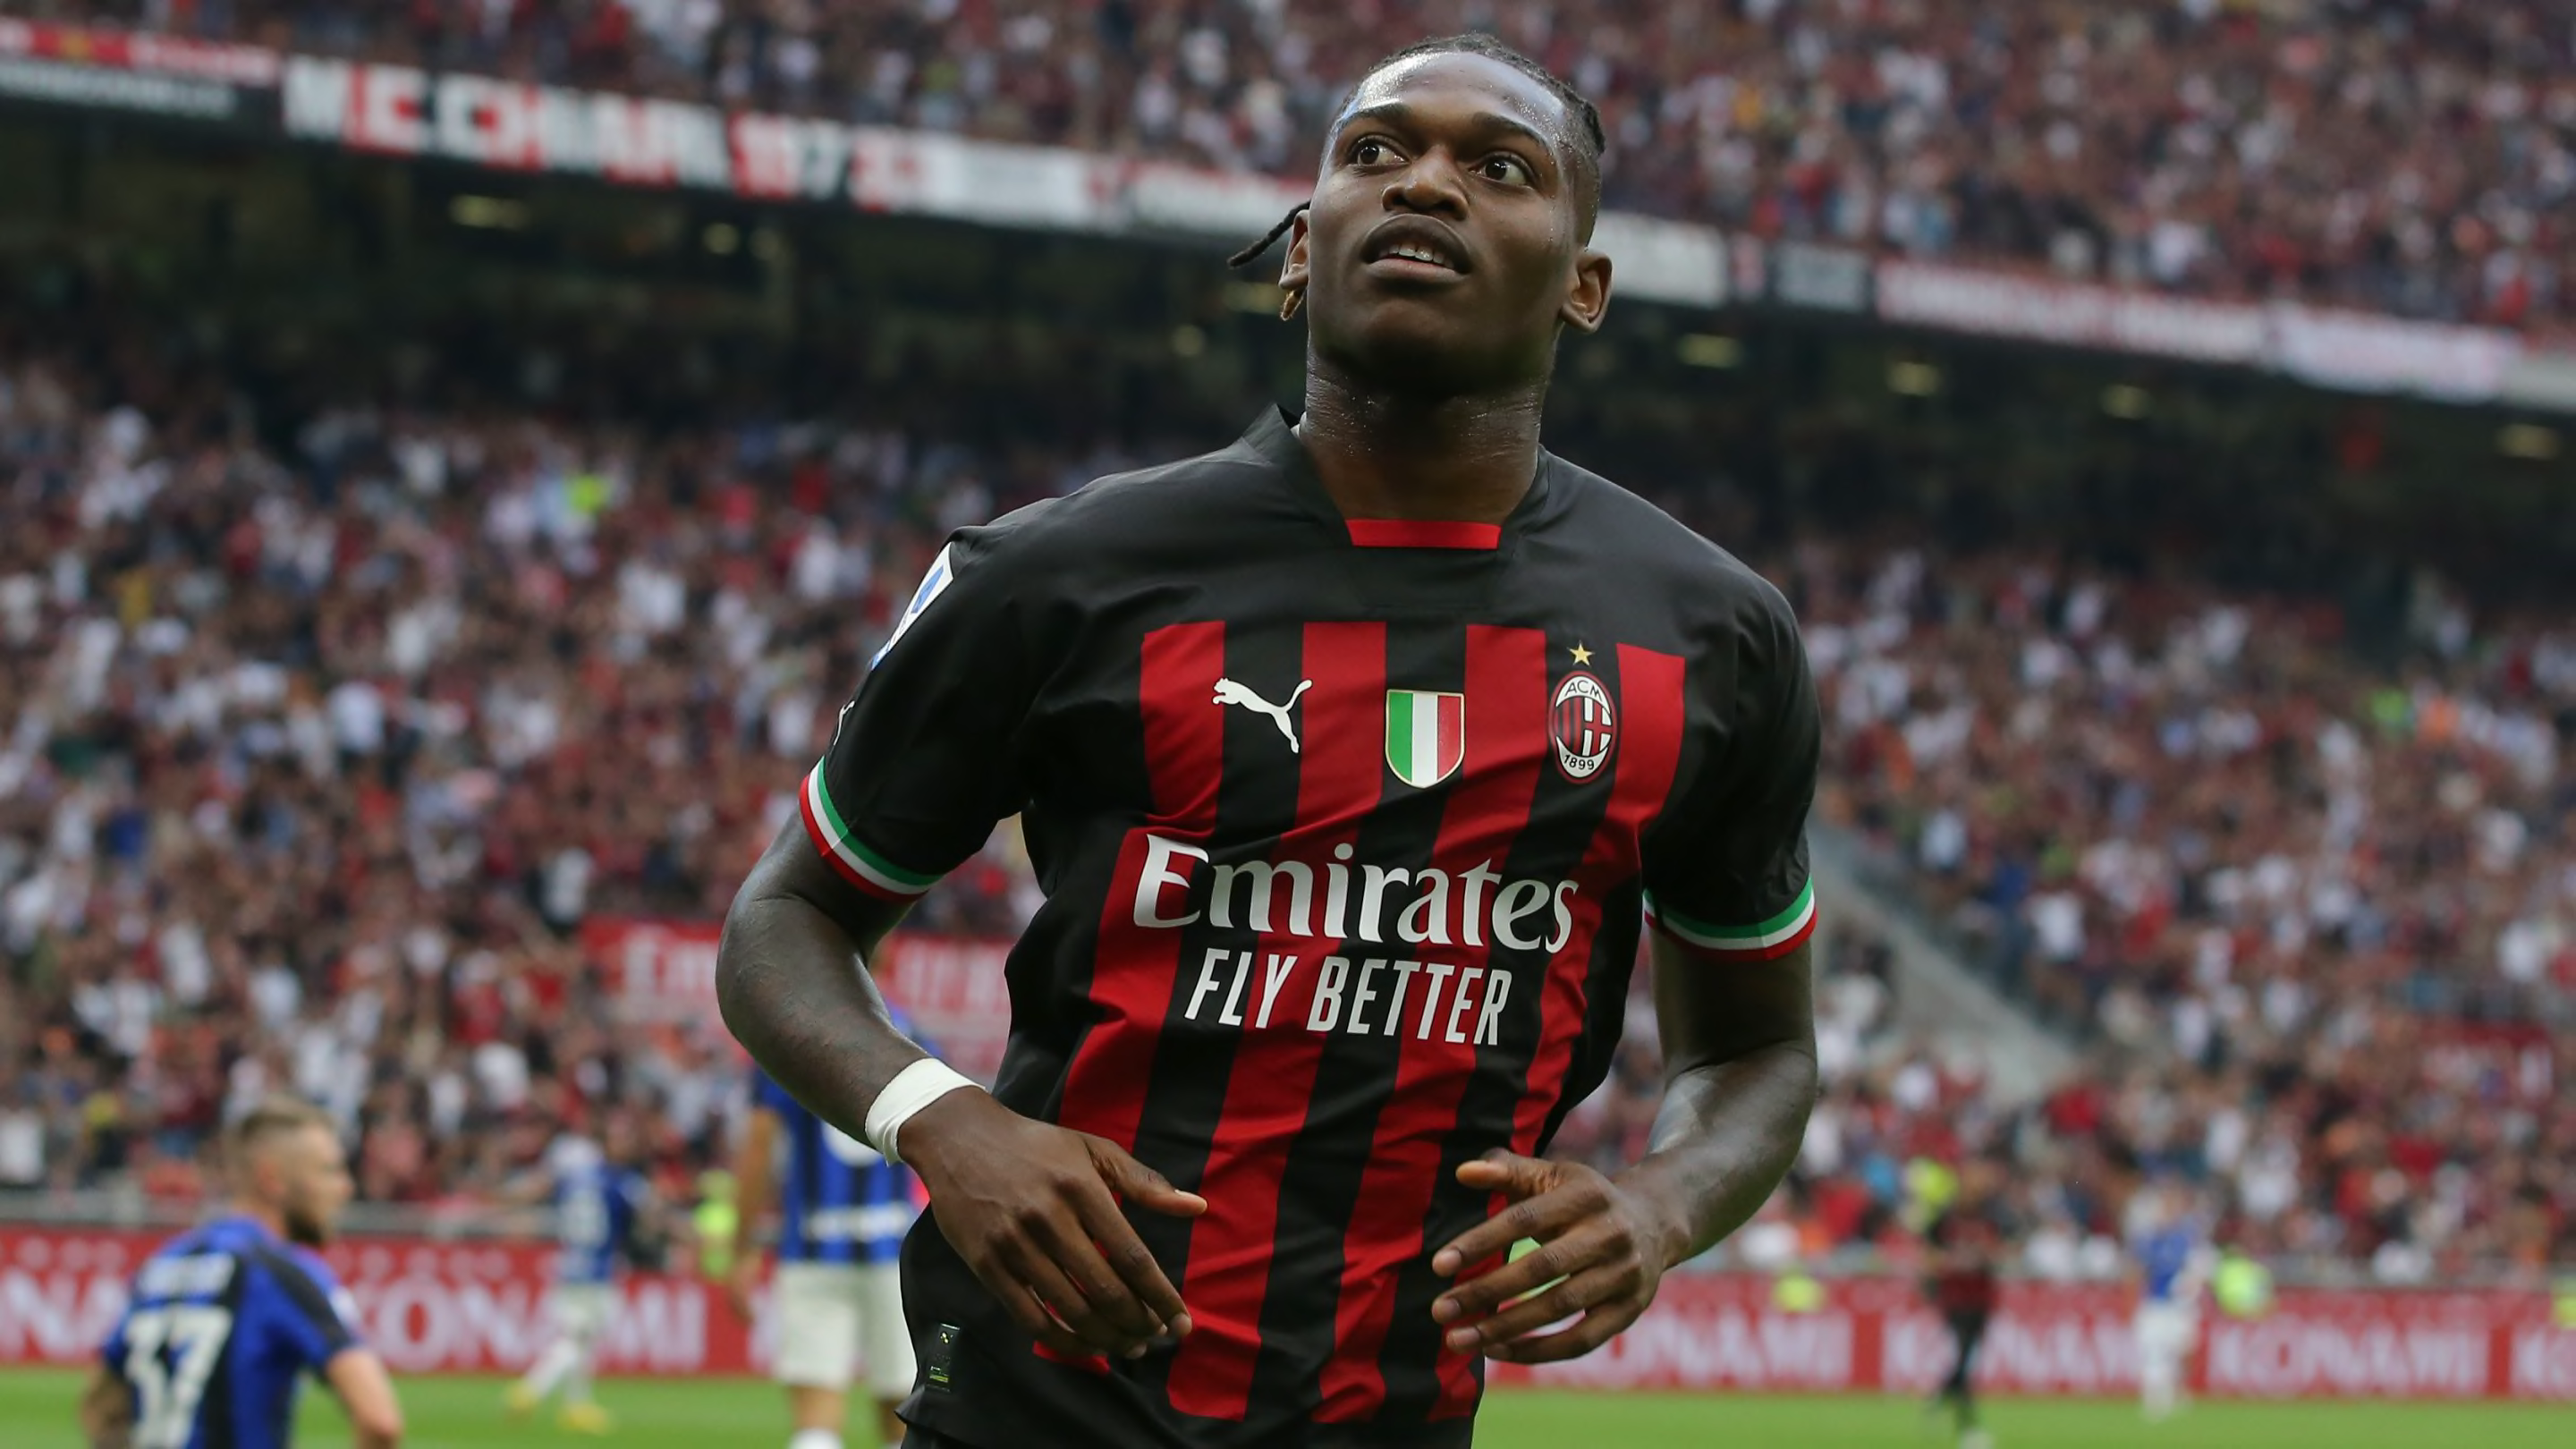 Rafael Leao: Paolo Maldini insists Chelsea target wants to stay at AC Milan but is 'not unsellable'